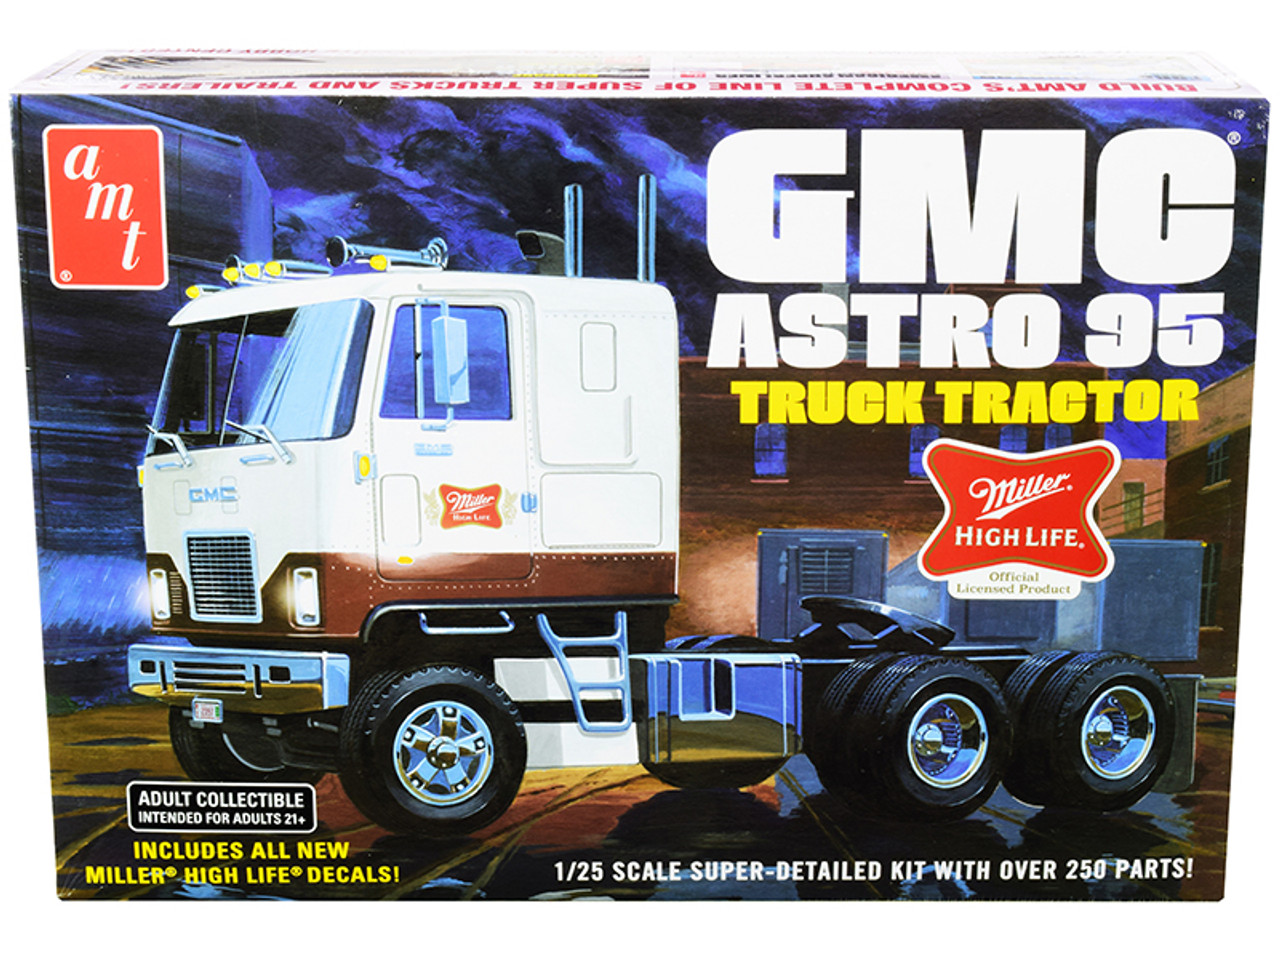 Skill 3 Model Kit GMC Astro 95 Truck Tractor "Miller" 1/25 Scale Model by AMT